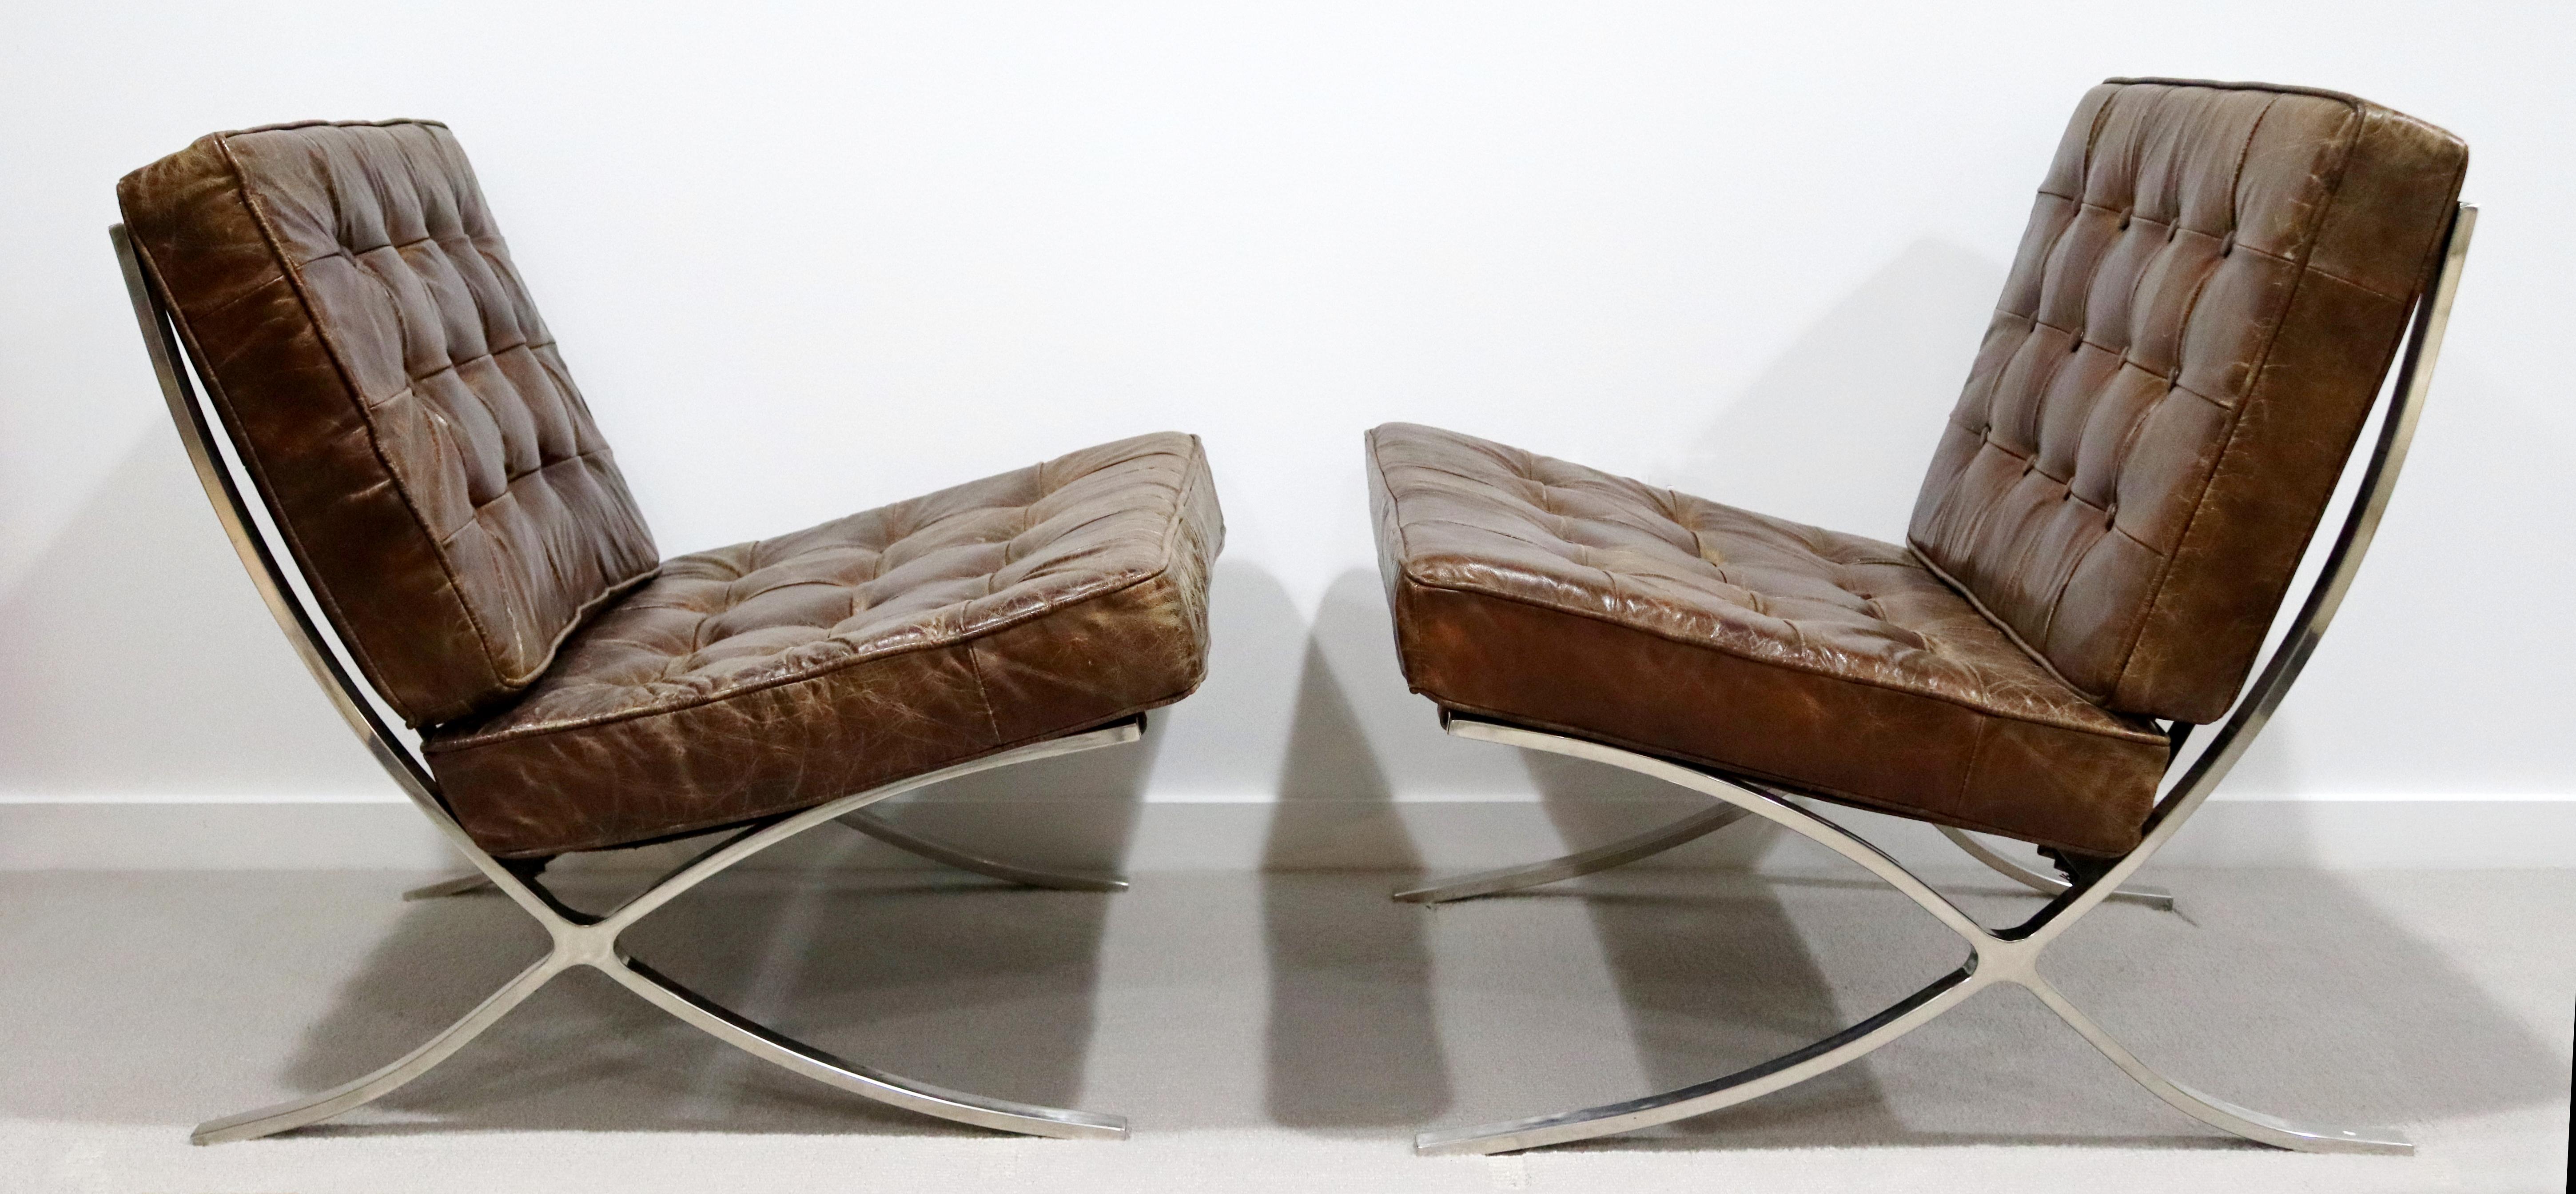 For your consideration is a magnificent pair of Barcelona style lounge chairs, with brown leather seats on chrome bases. With the perfect vintage patina. Purchased in 1980. The dimensions are 31.5